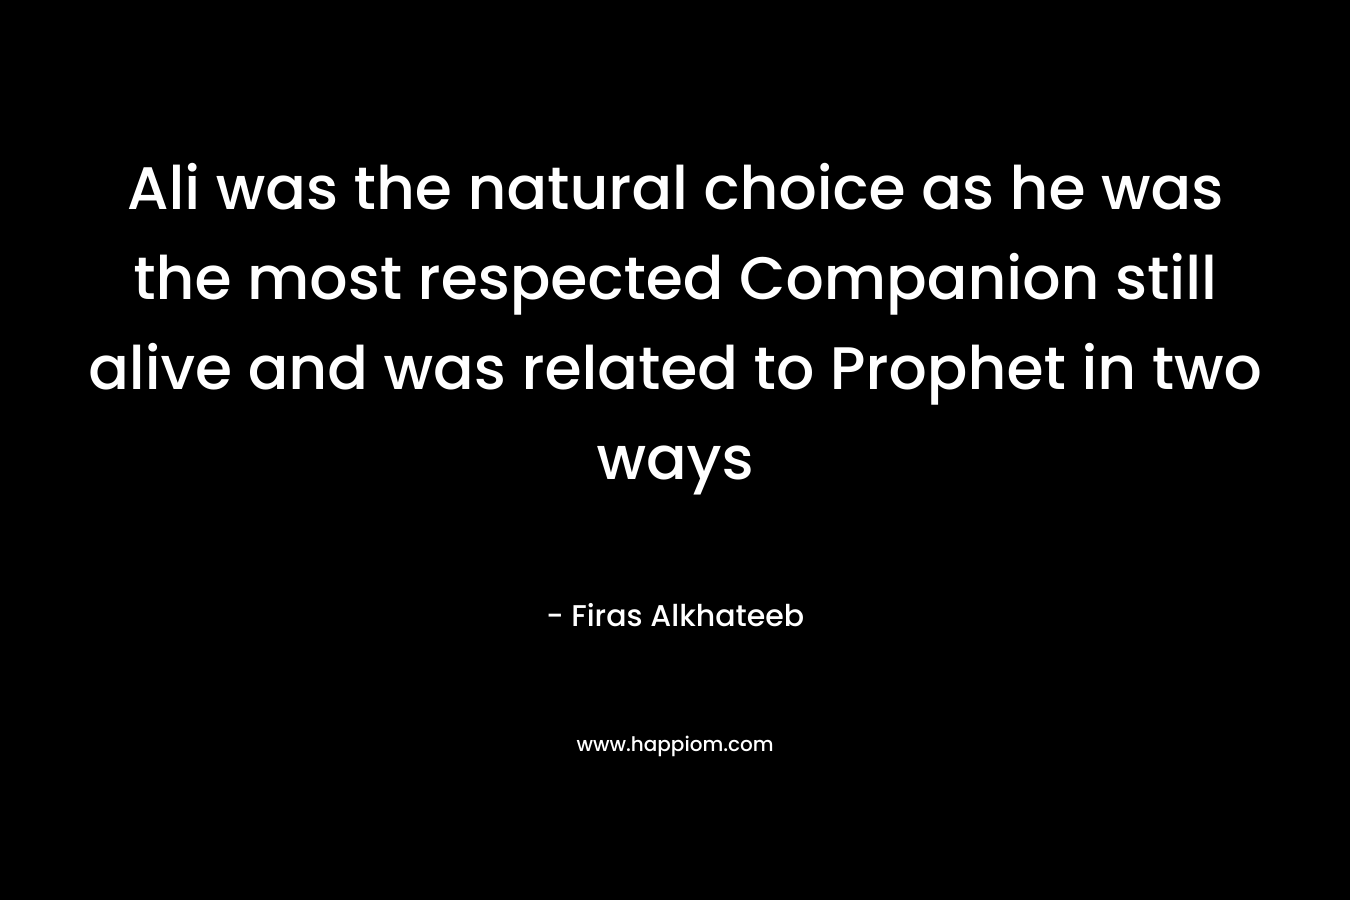 Ali was the natural choice as he was the most respected Companion still alive and was related to Prophet in two ways – Firas Alkhateeb